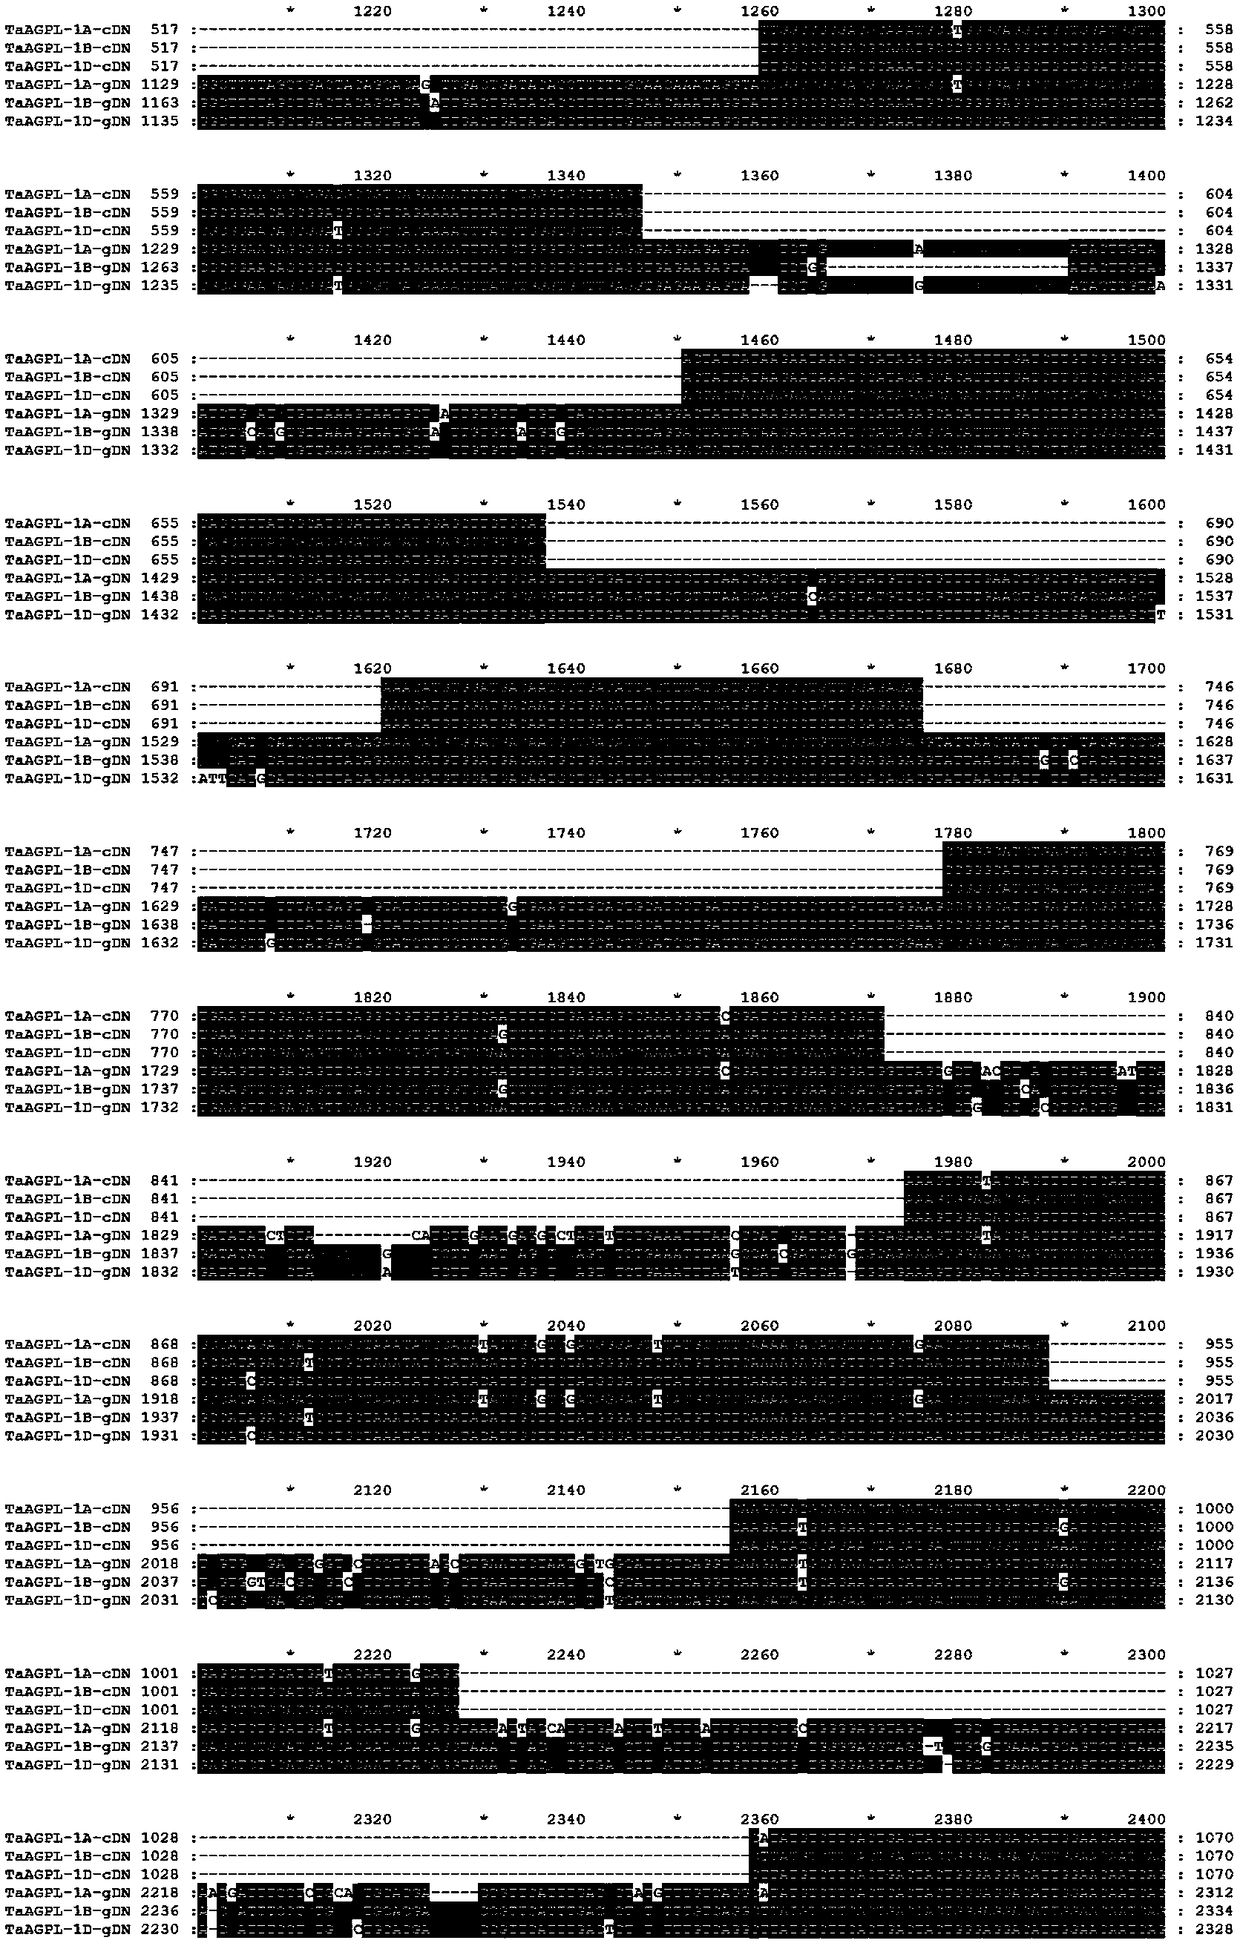 A method and kit for detecting allelic variation of taagpl gene